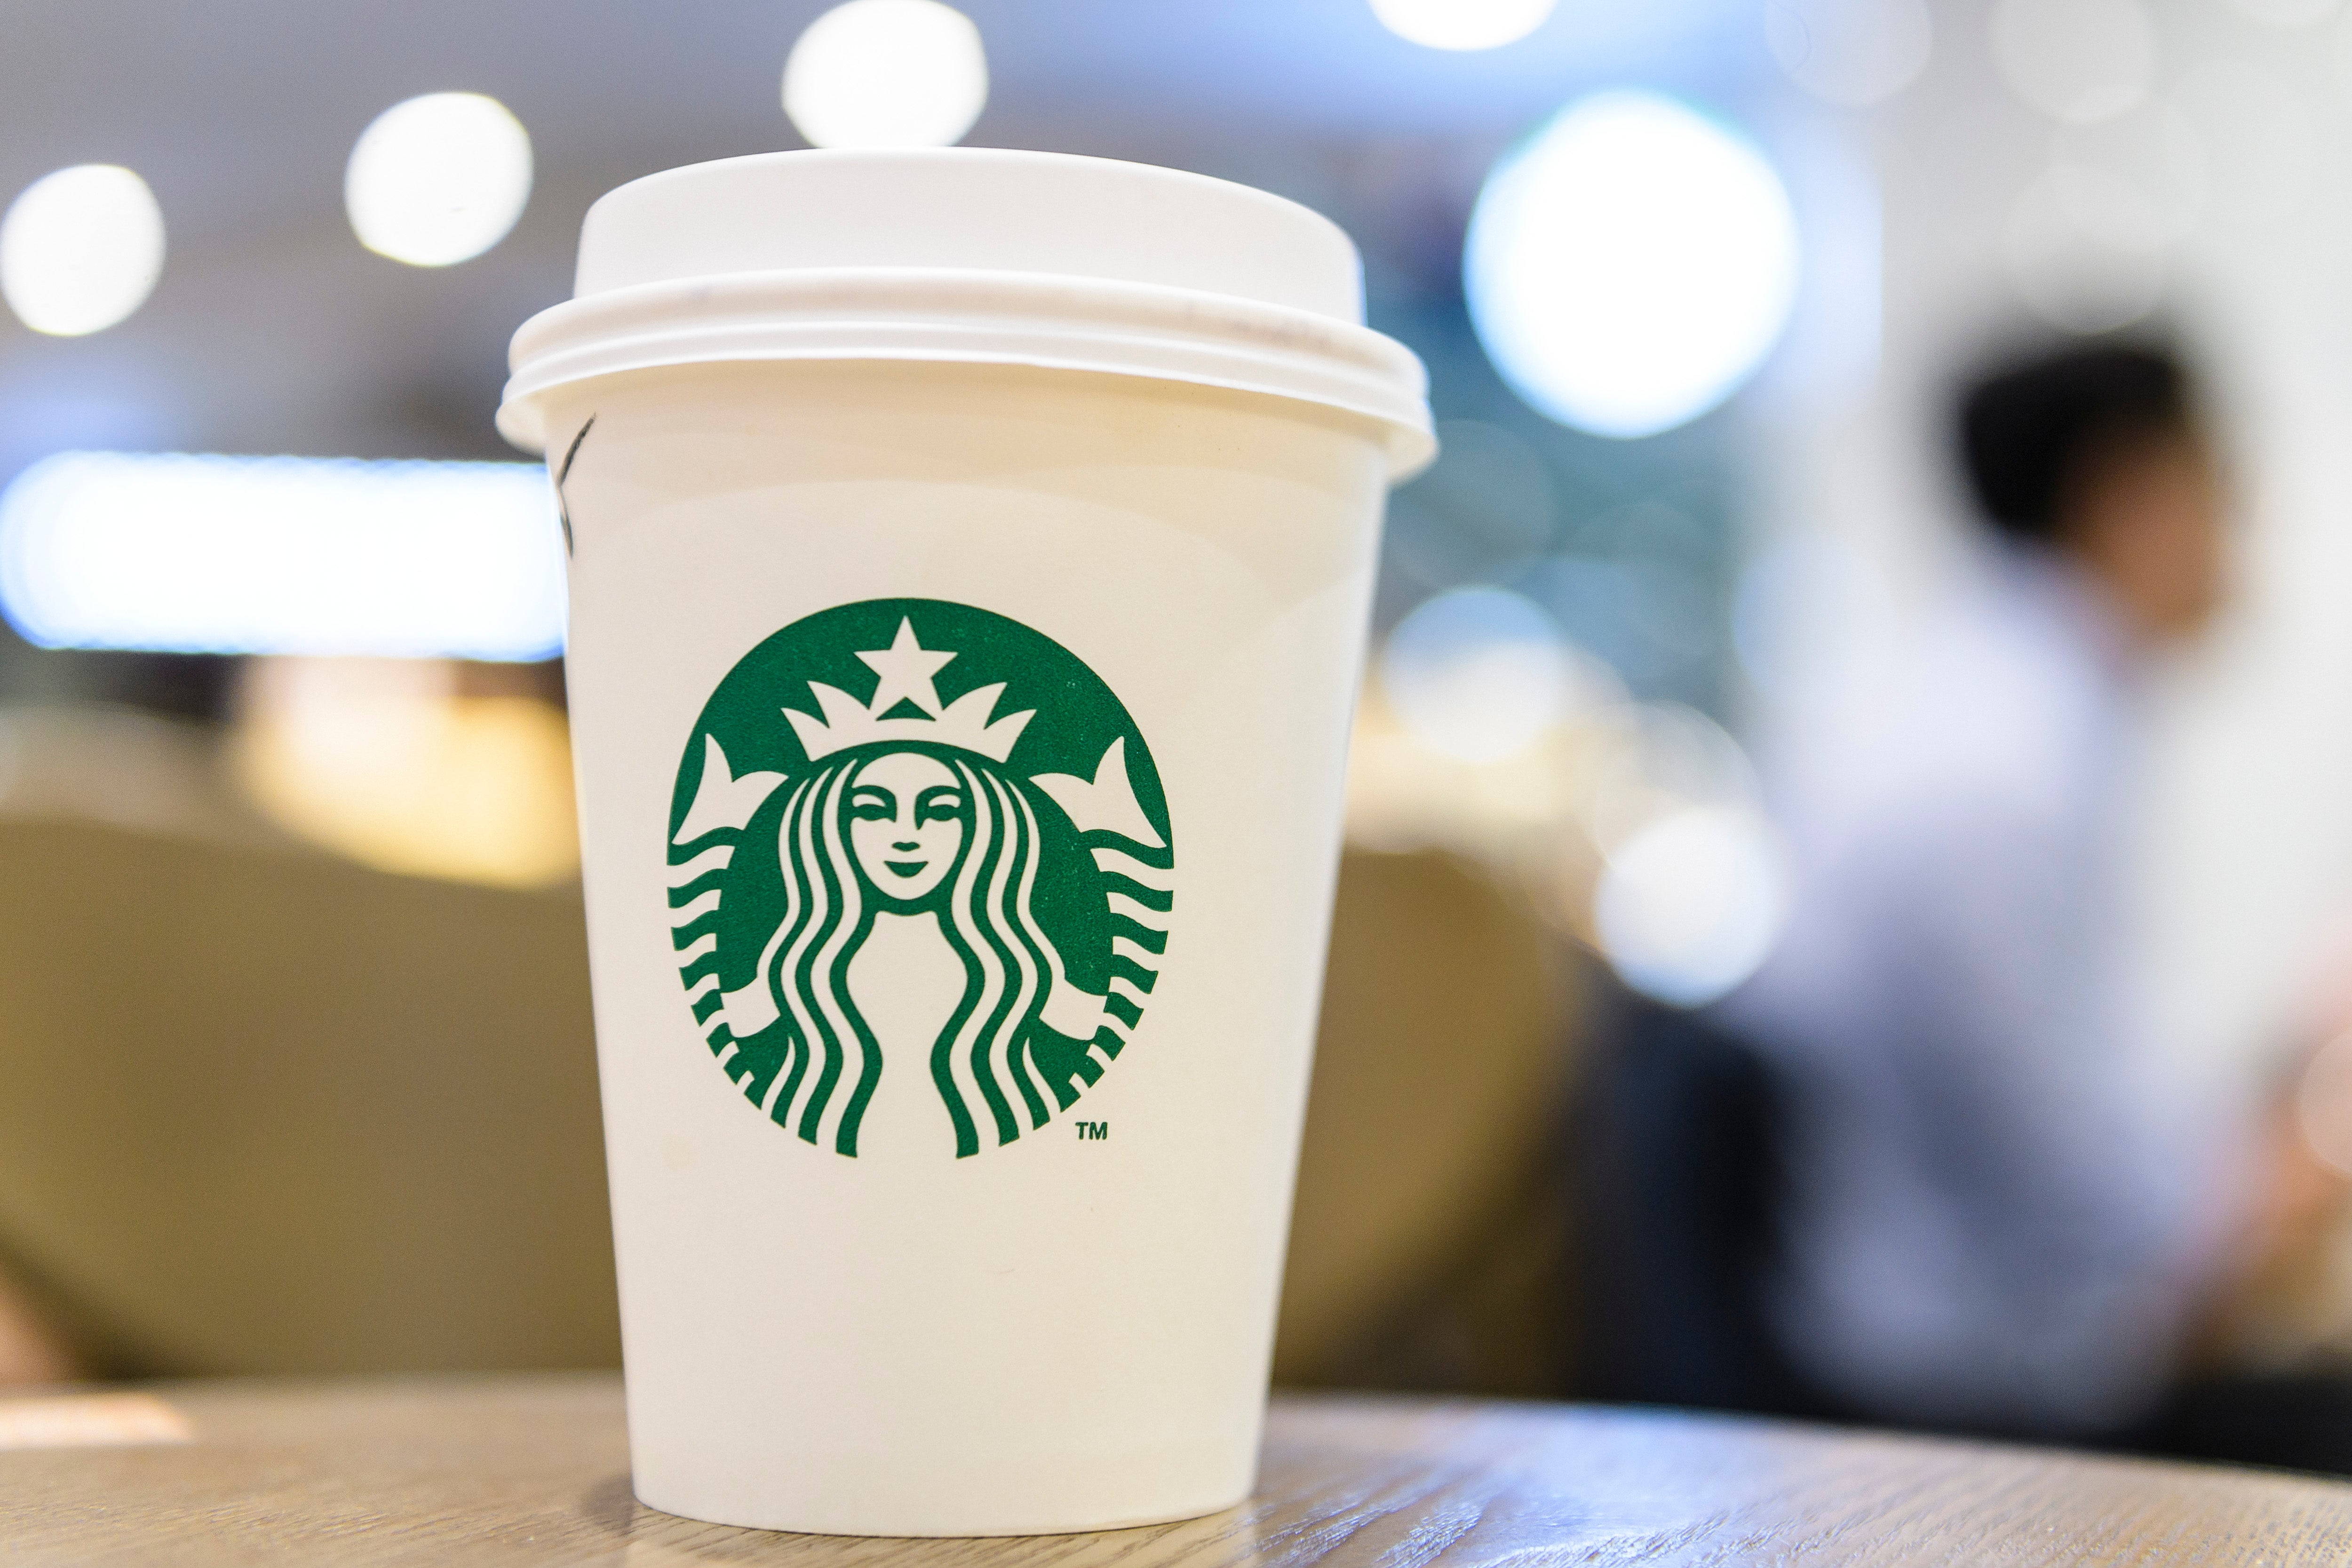 Coffee inflation: Starbucks Rewards announces upcoming changes to its redemption rates